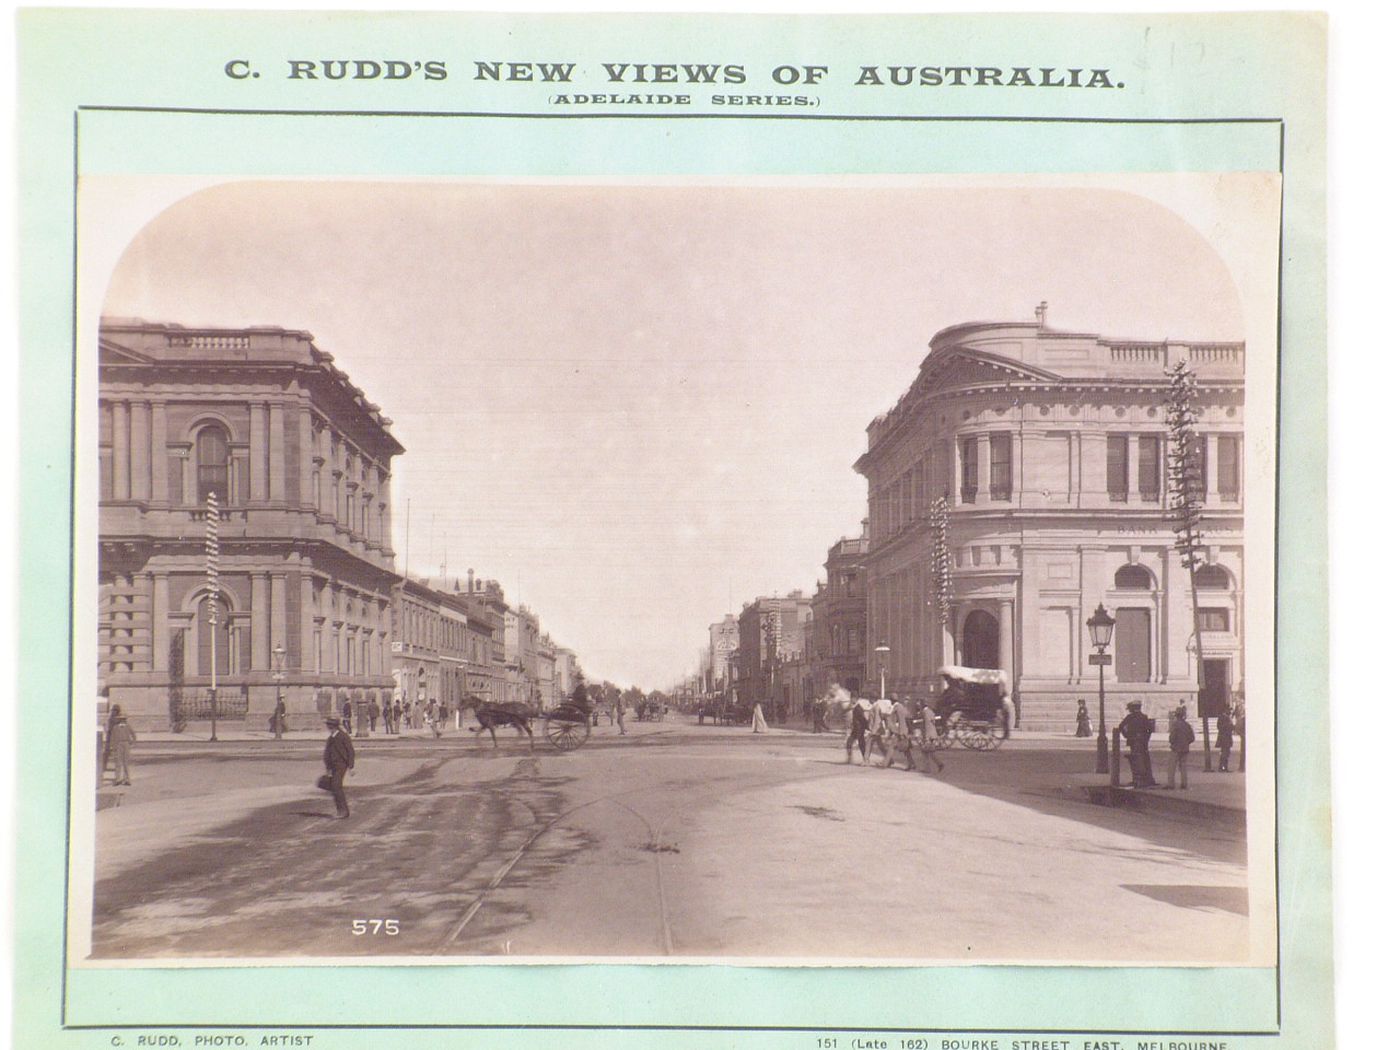 View of Currie Street from King-William Street showing the Bank of Australia (now the Australia and New Zealand (ANZ) Bank) on the right, Adelaide, Australia